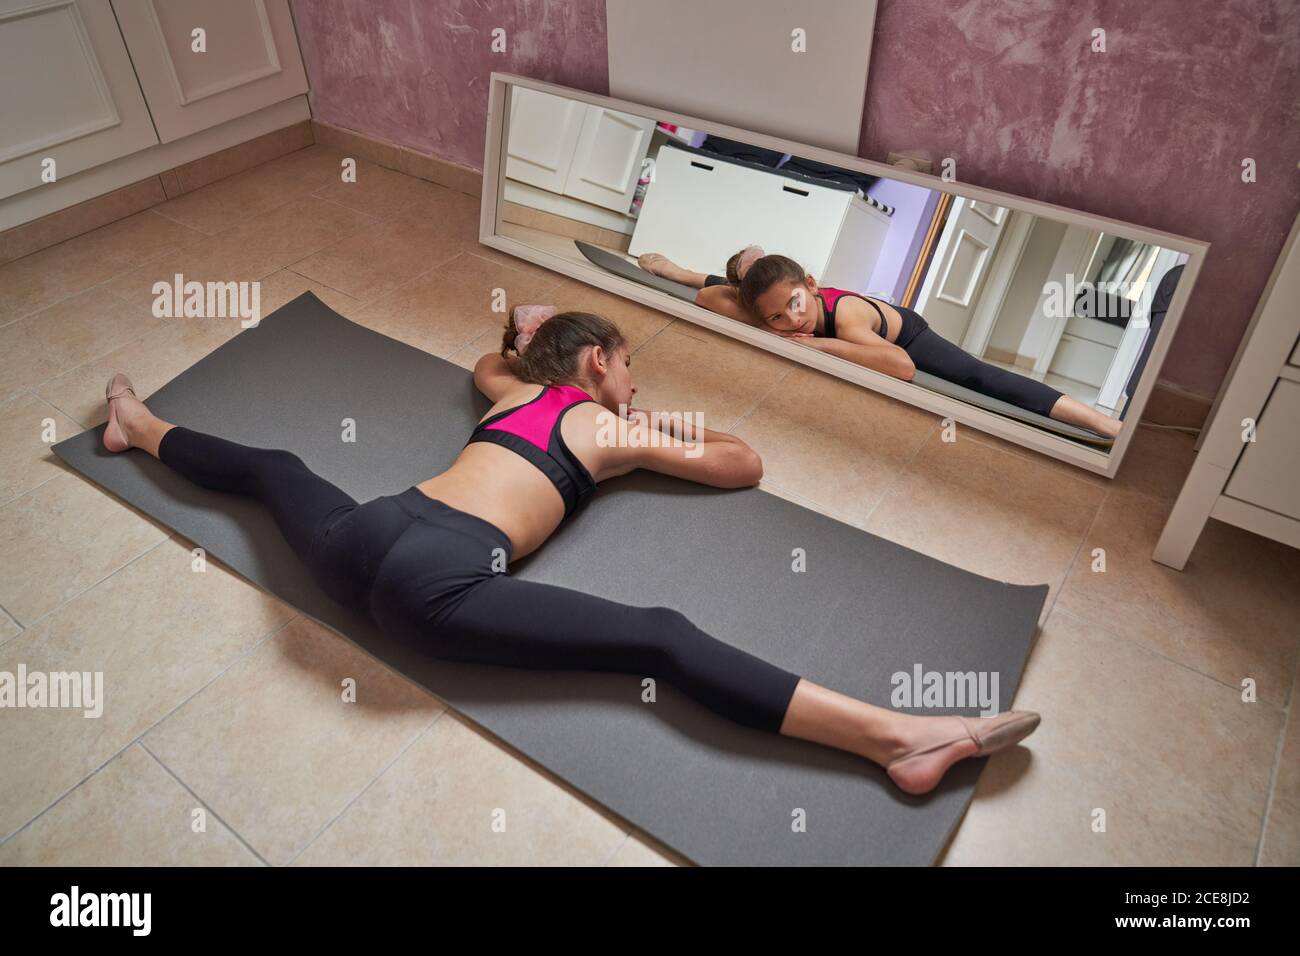 From above slim teenage girl sitting on mat doing splits with arms raised practicing gymnastics in front of mirror Stock Photo